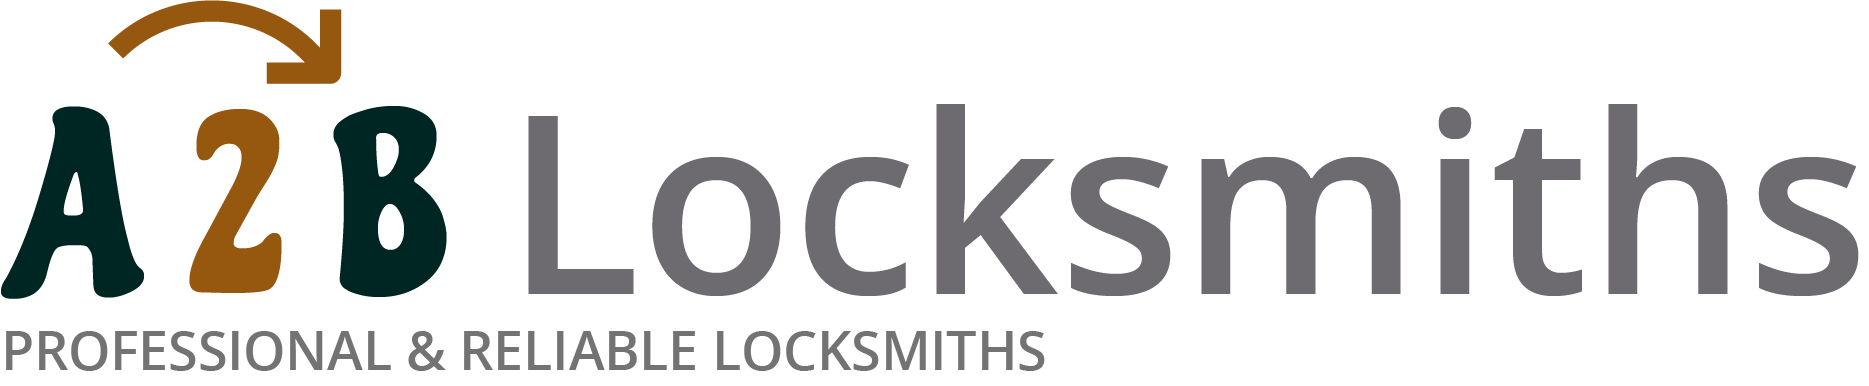 If you are locked out of house in Bracknell, our 24/7 local emergency locksmith services can help you.